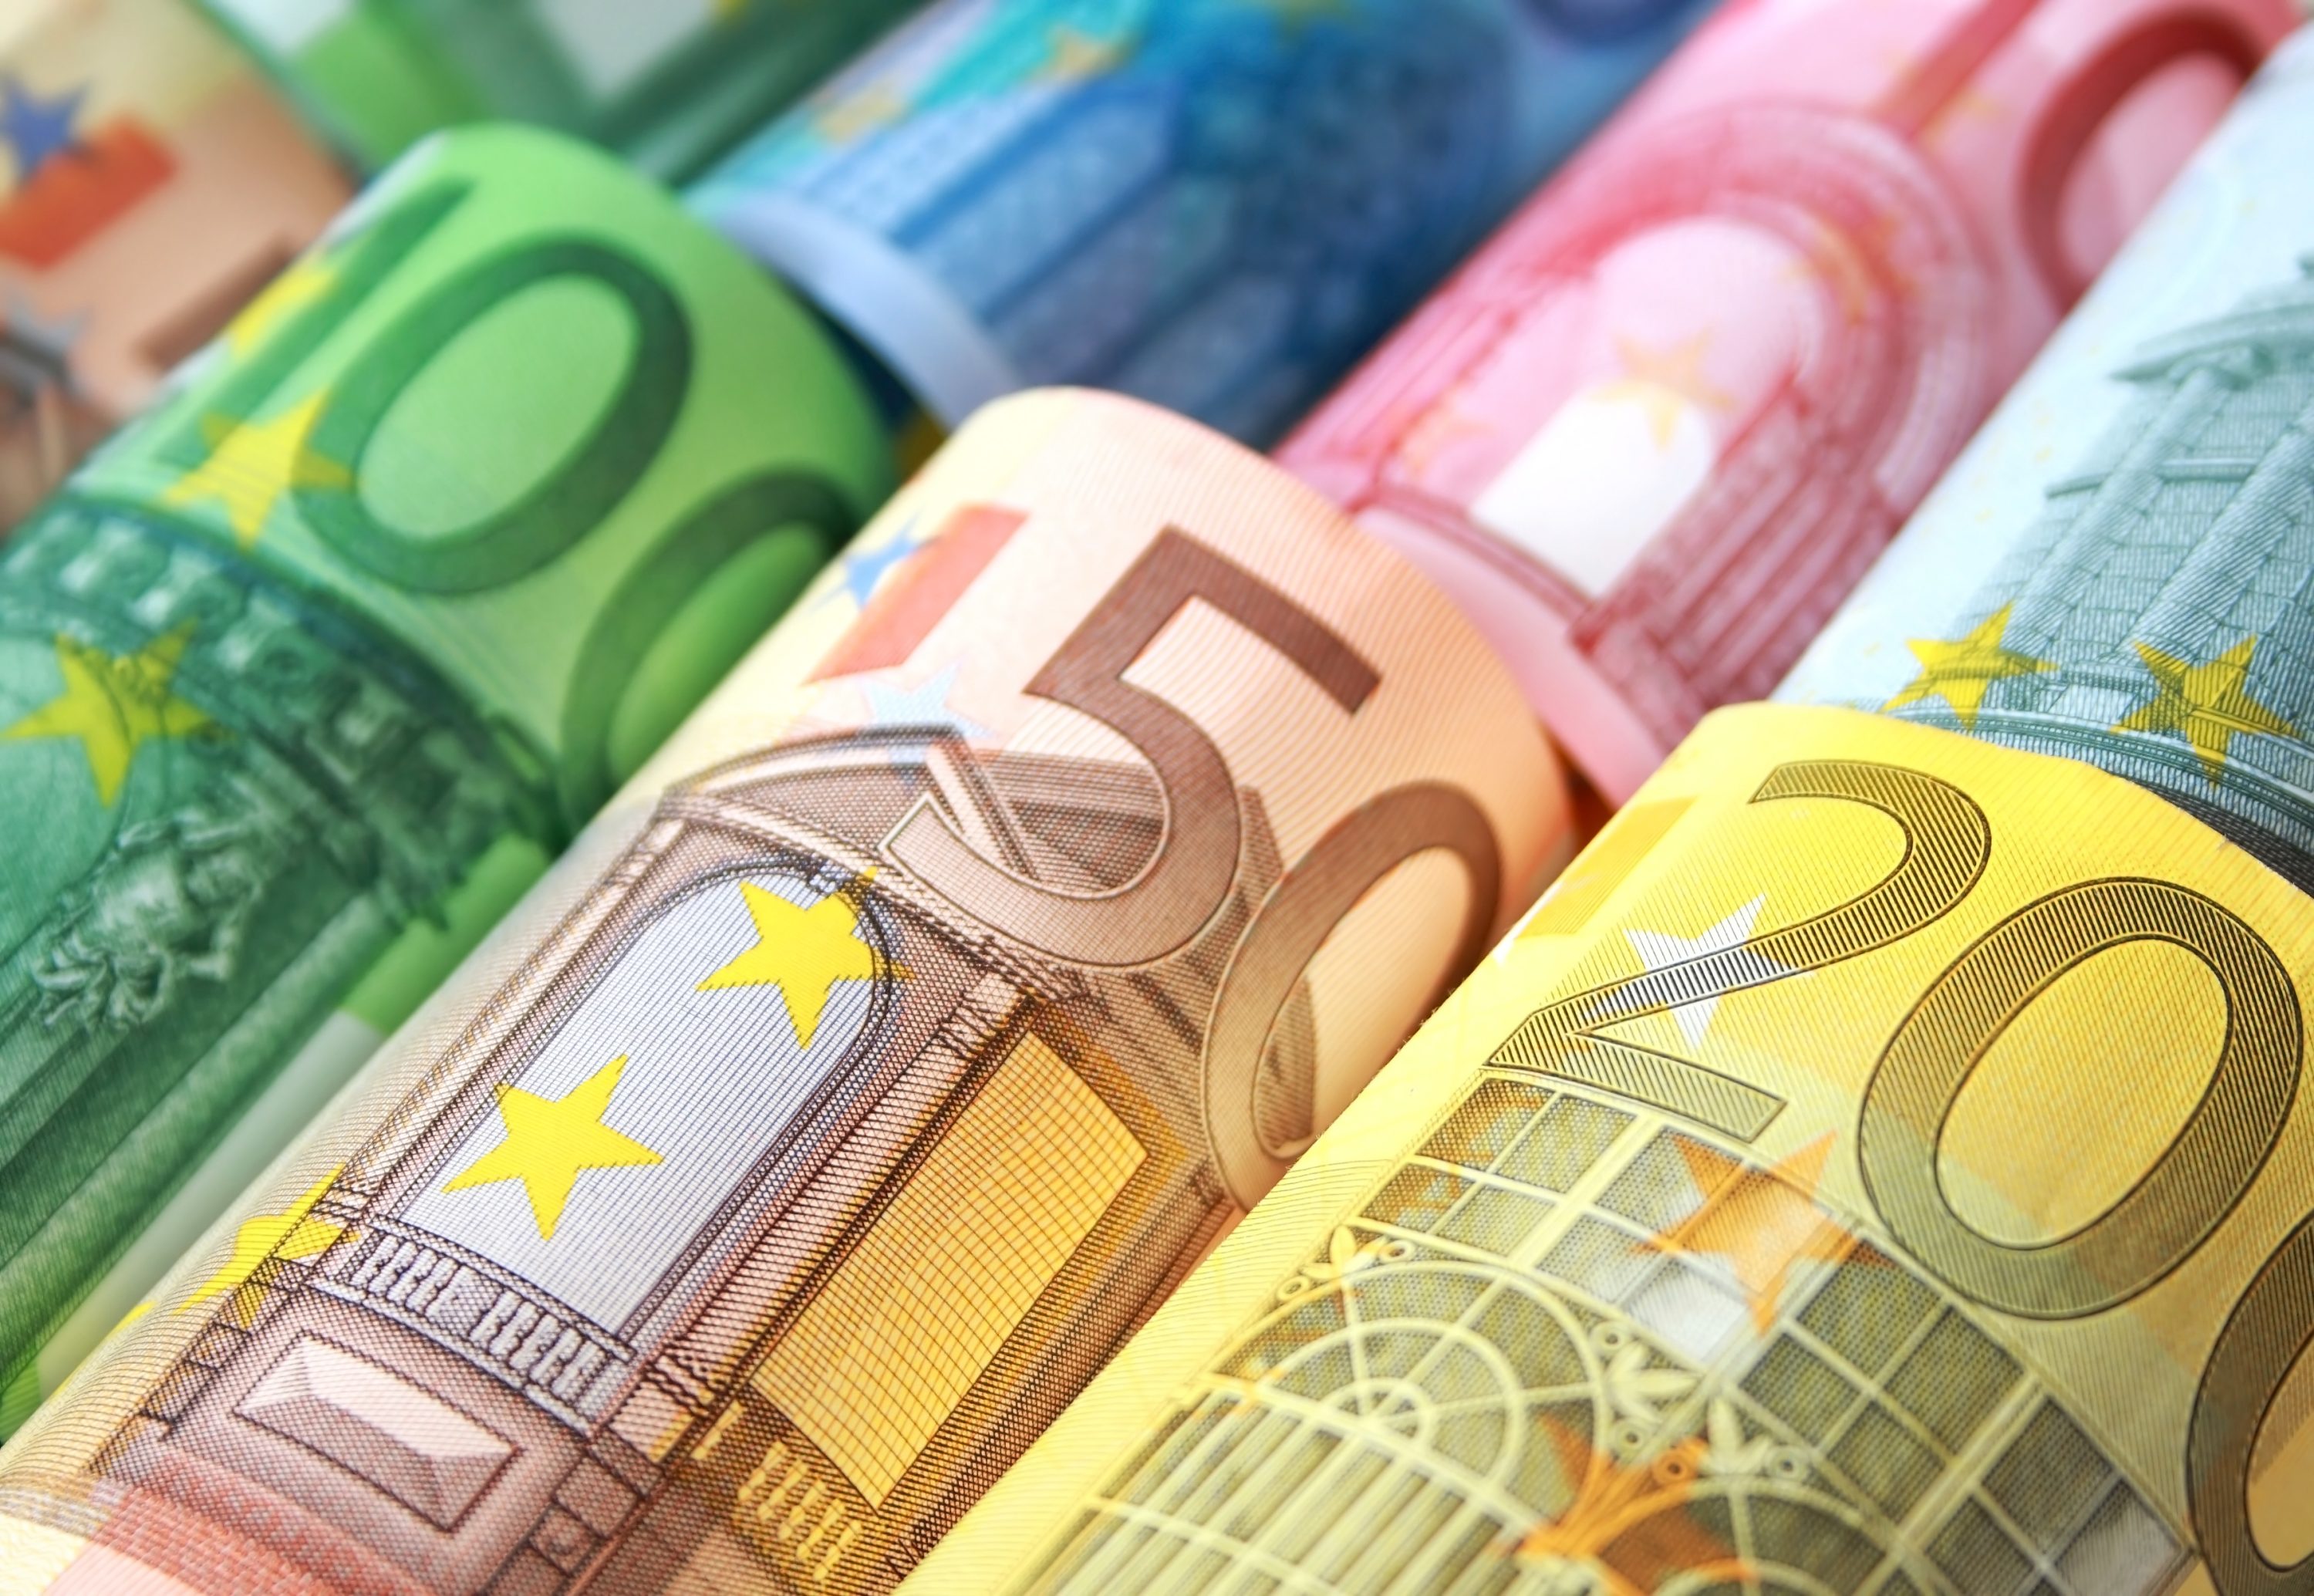 Euro Sign And Currency High-Res Stock Photo - Getty Images